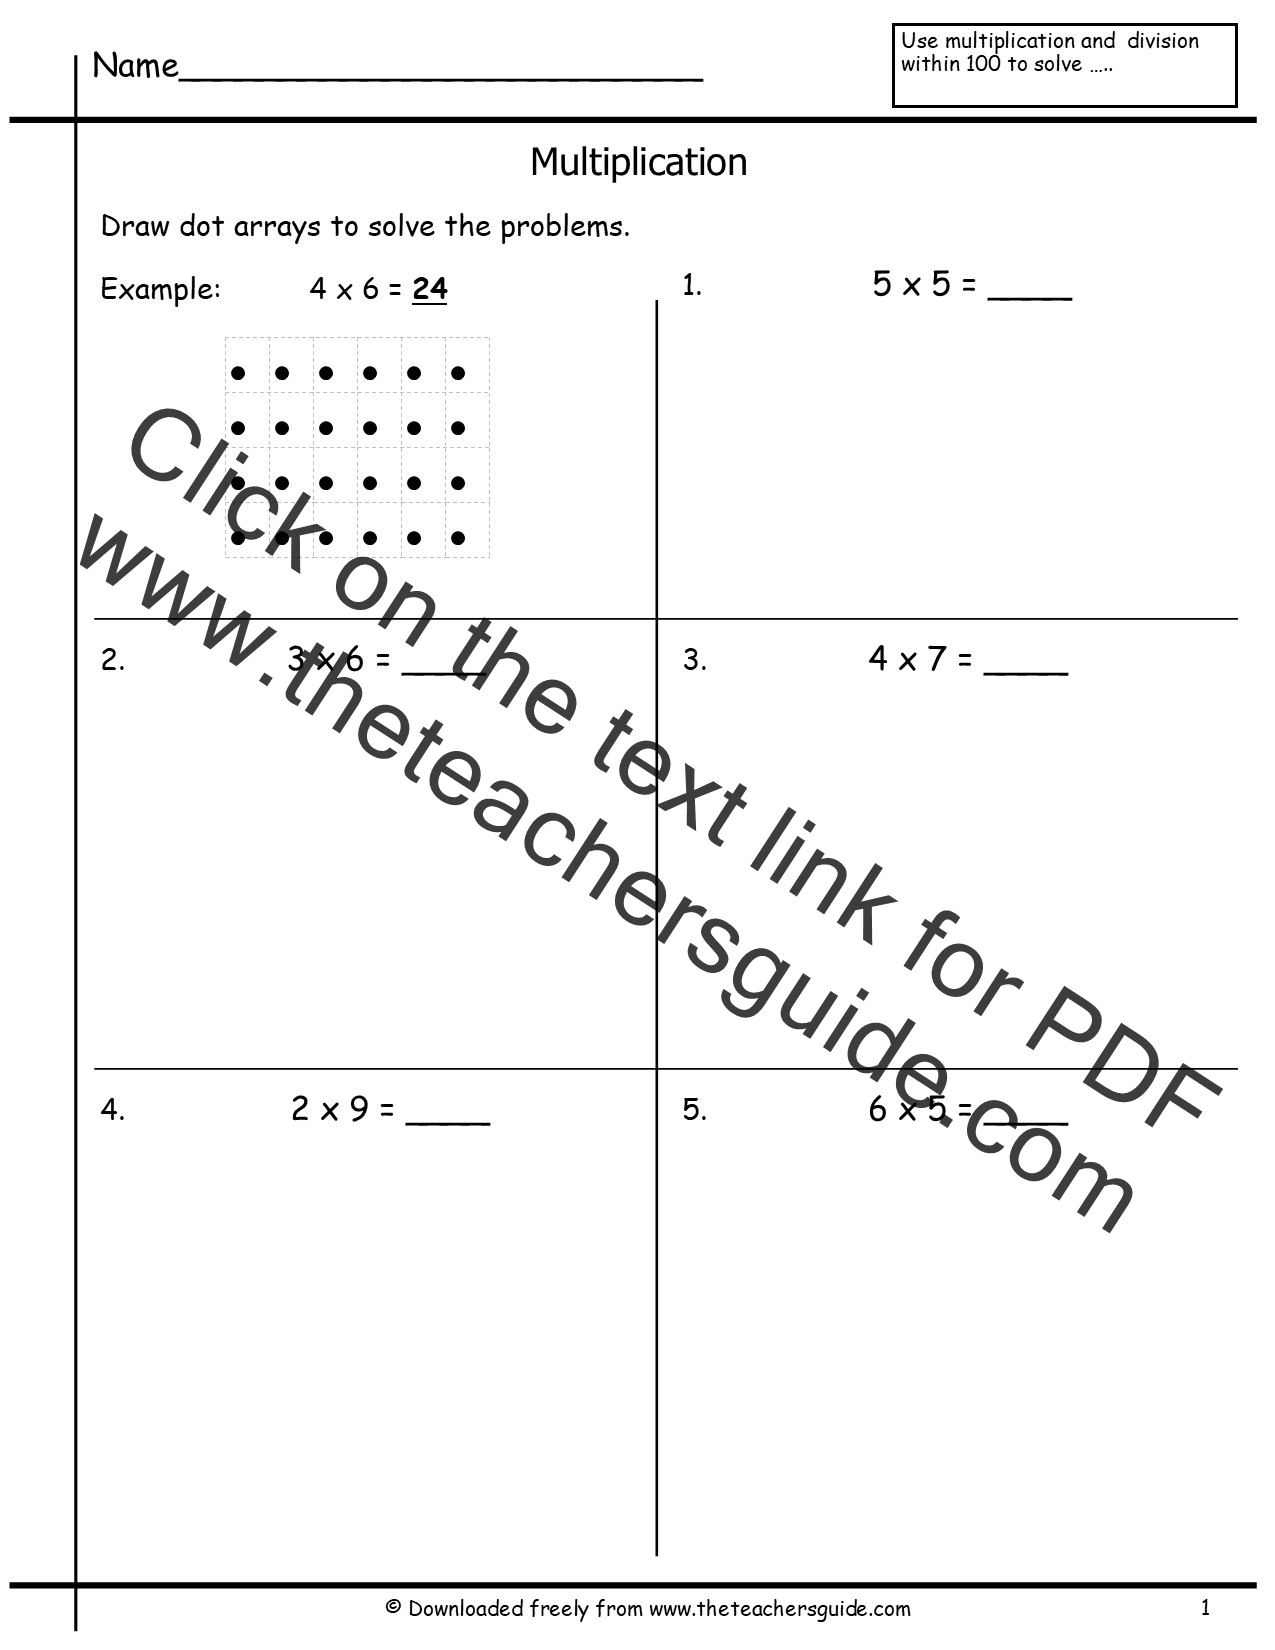 Multiplication Array Worksheets From The Teacher s Guide